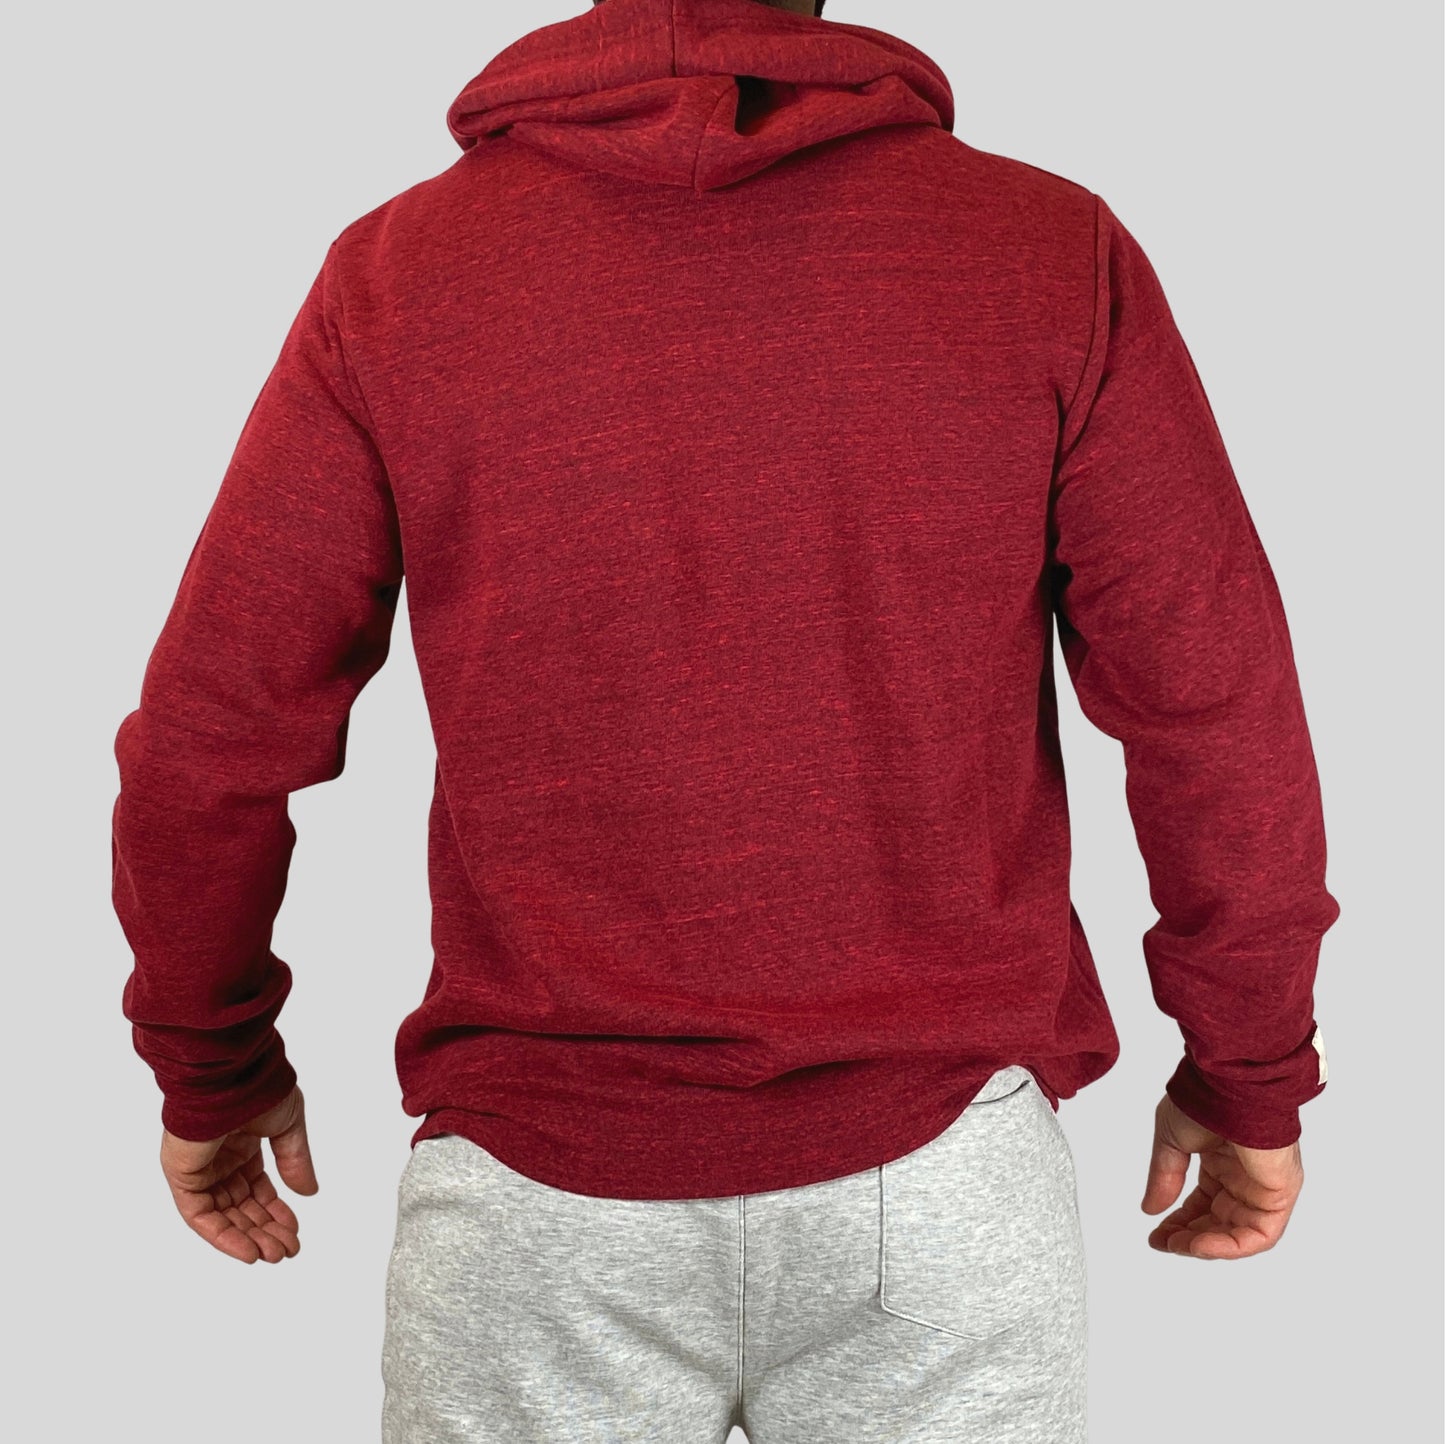 EVERYDAY | The VLAD |  Full Zip Embroidered 8X Hoodie | Cardinal Red